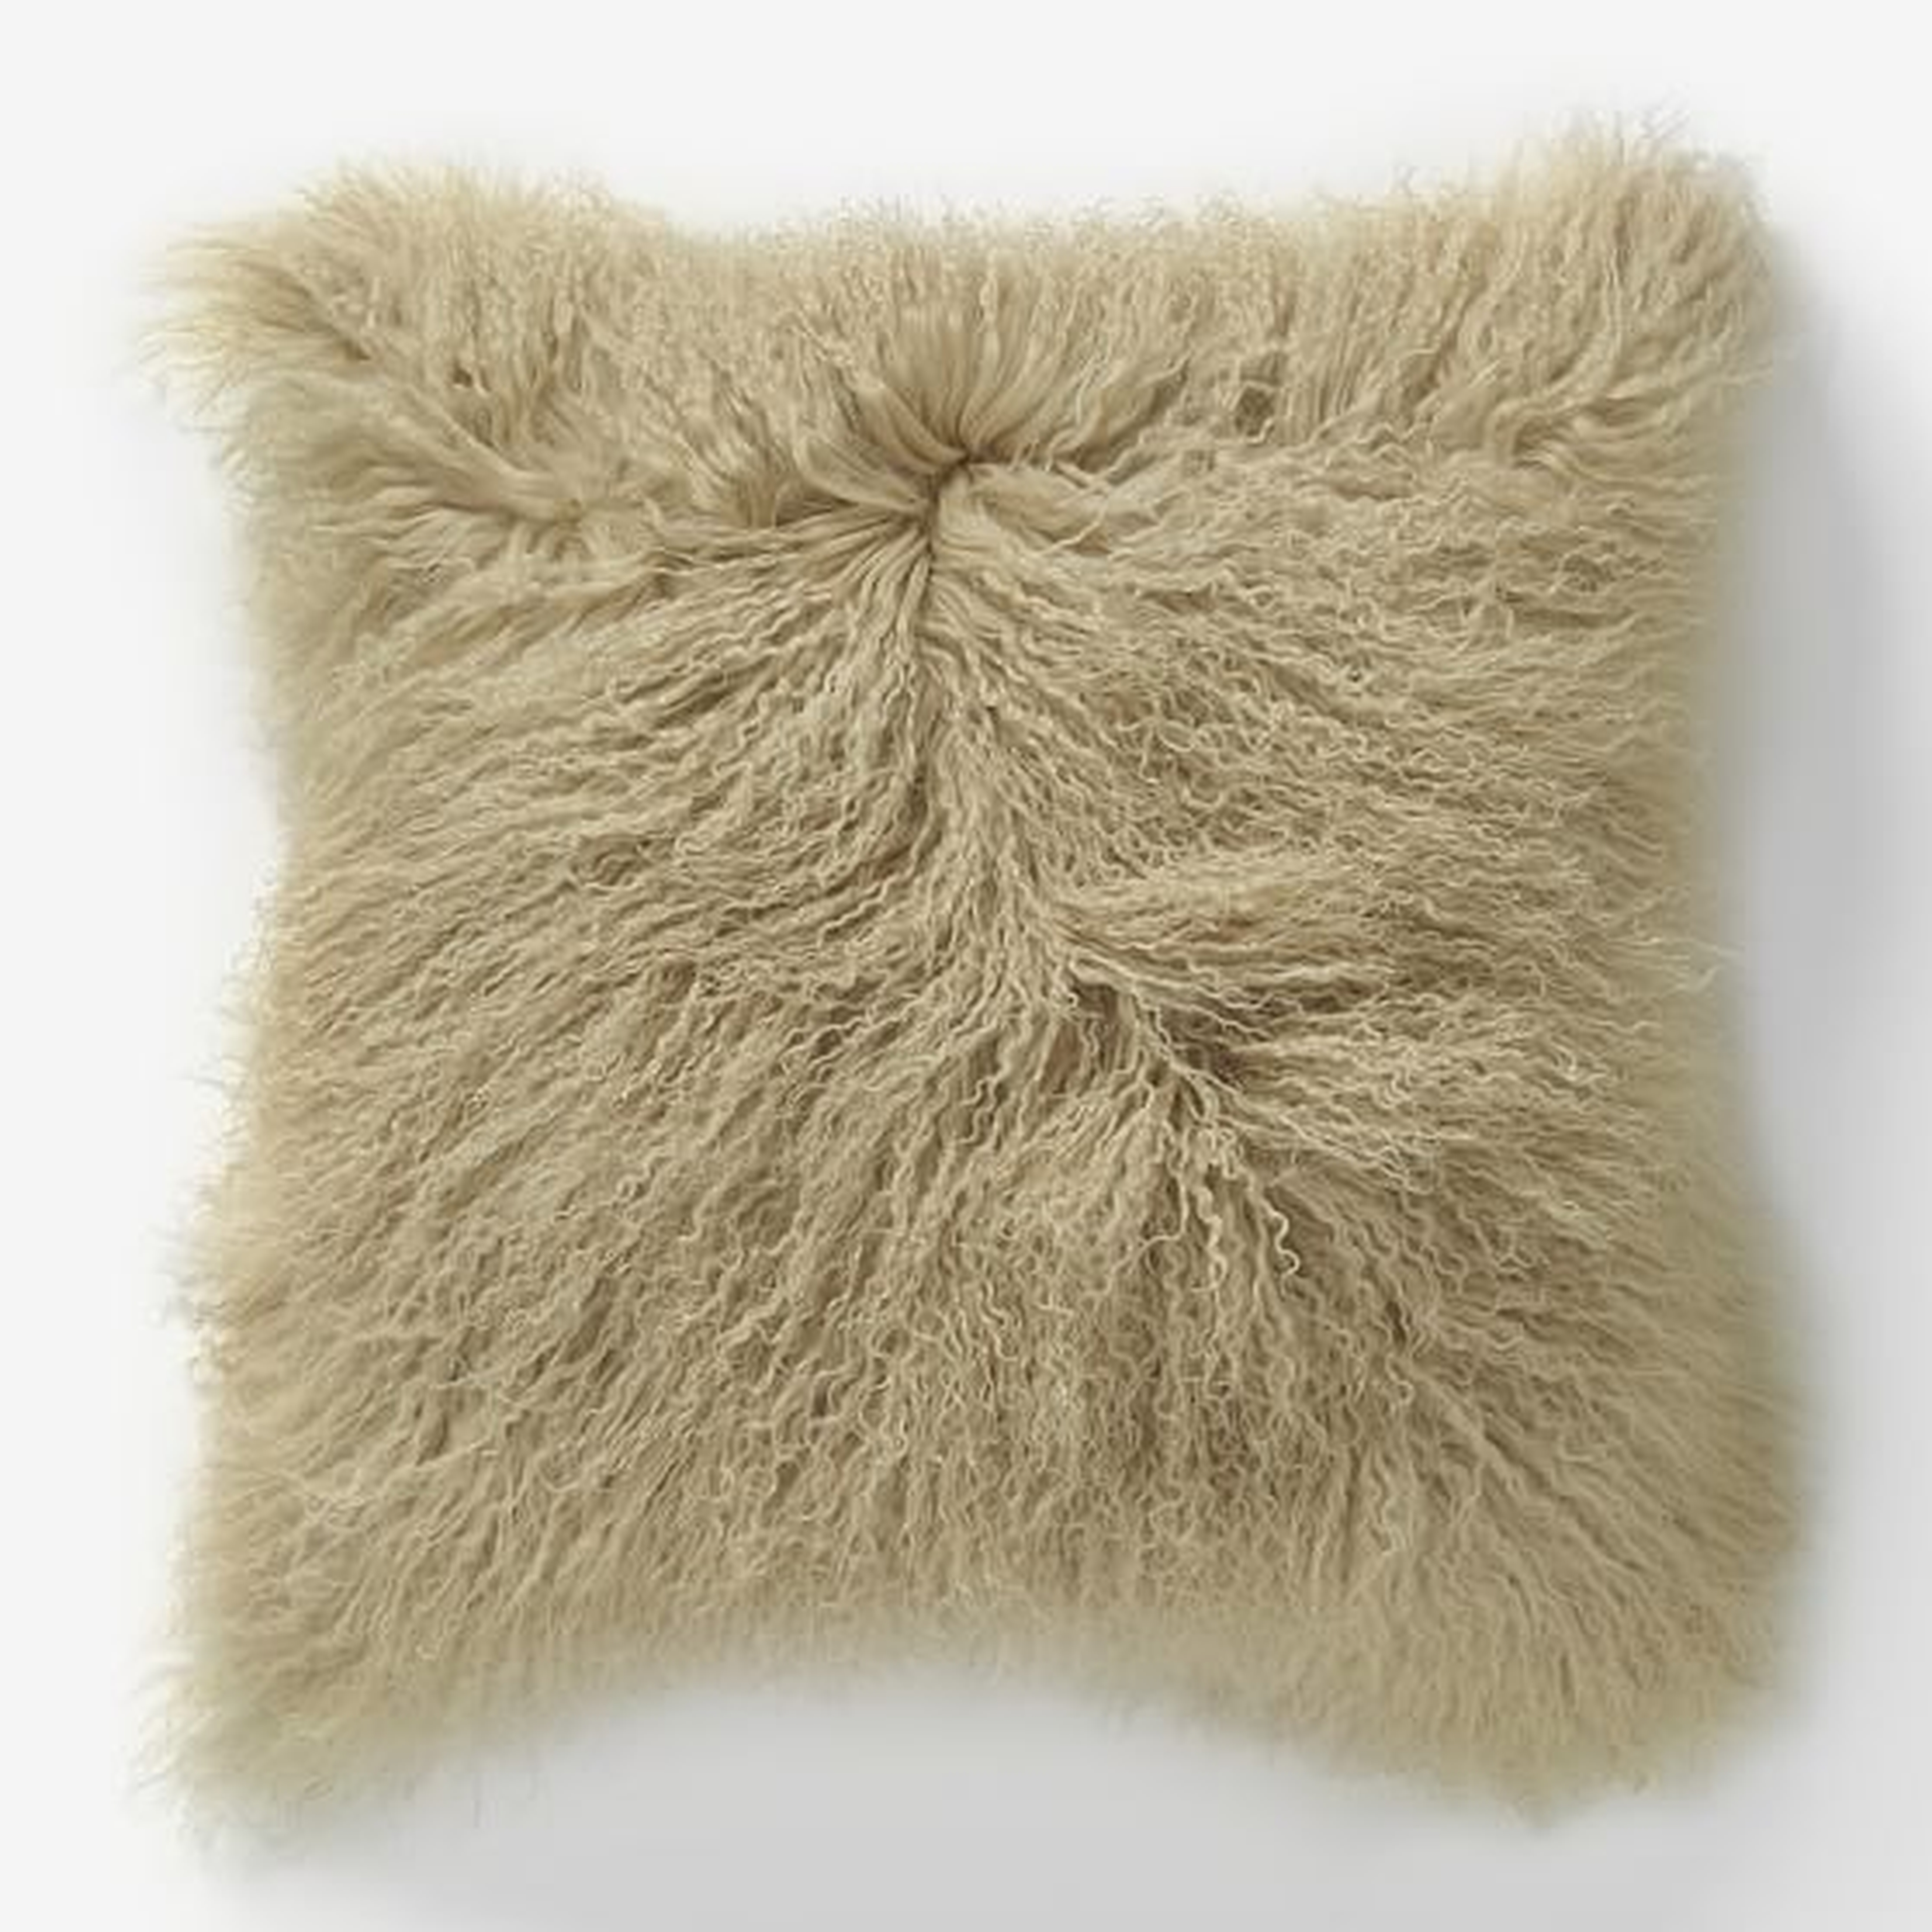 Mongolian Lamb Pillow Cover with Down Insert, Pebble, 16"x16" - West Elm